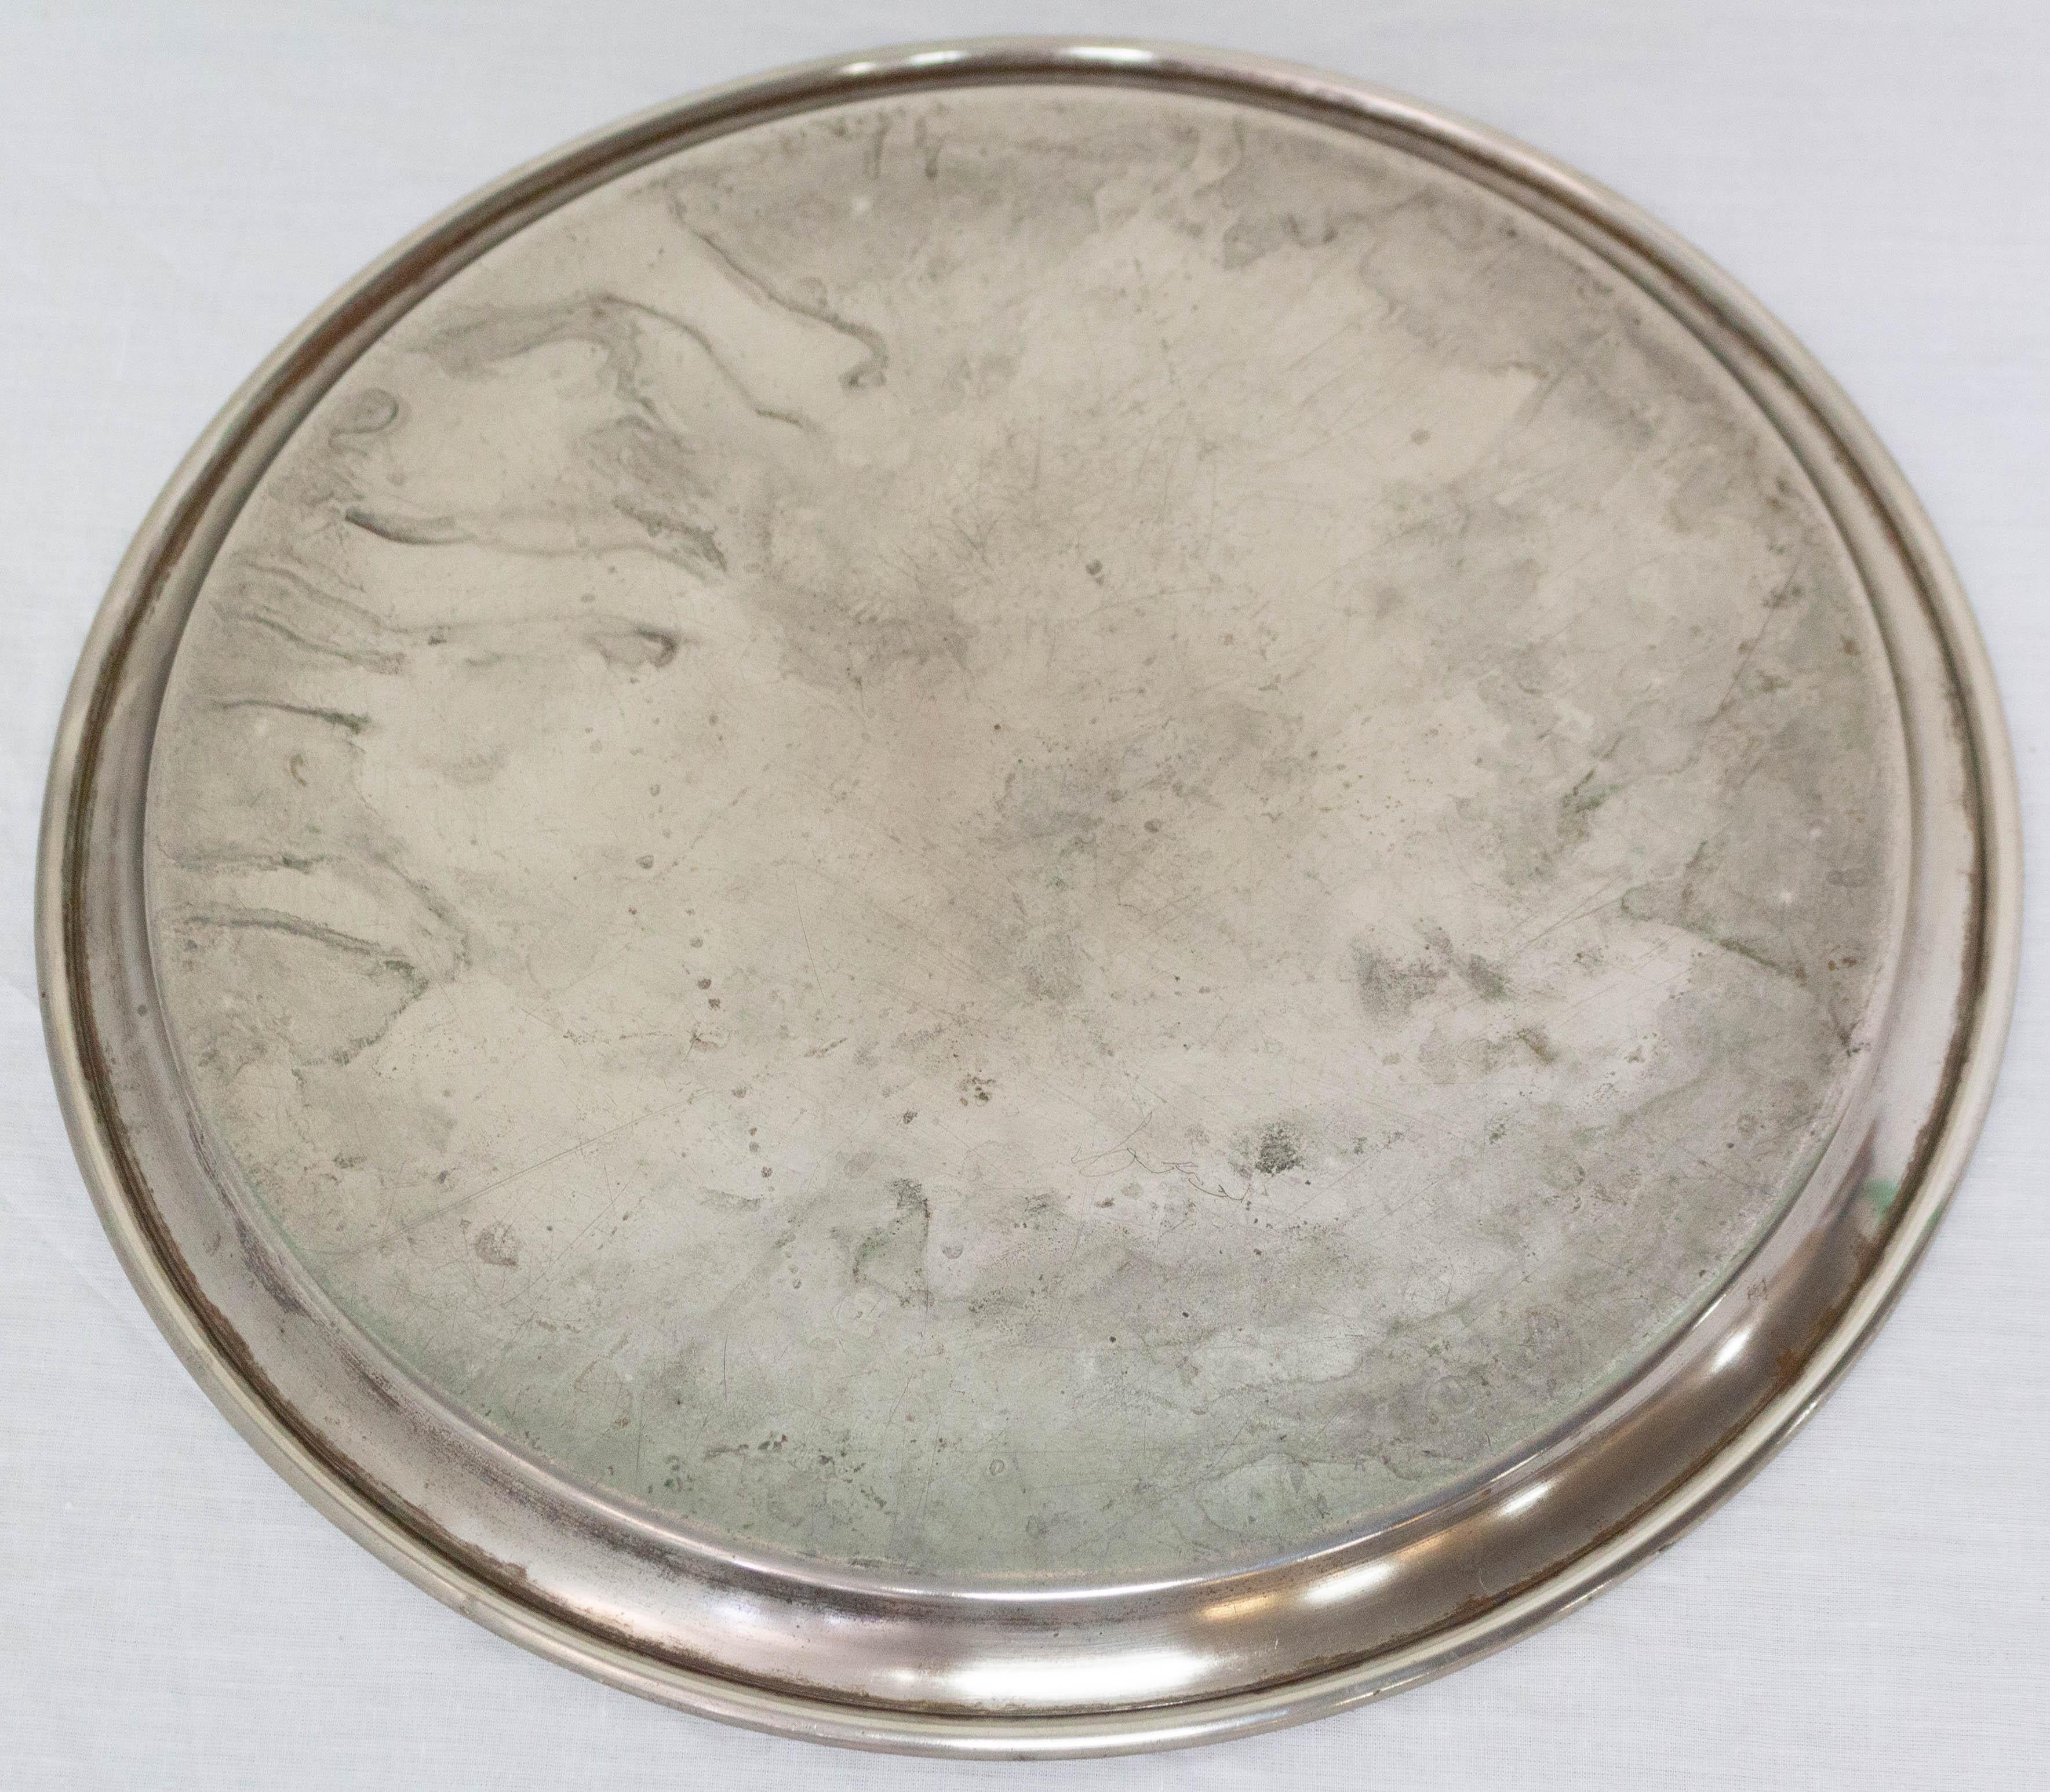 French tin-plated brass tray,
Early 20th century

Good condition

Shipping:
35/35/2 cm 0.9 kg.